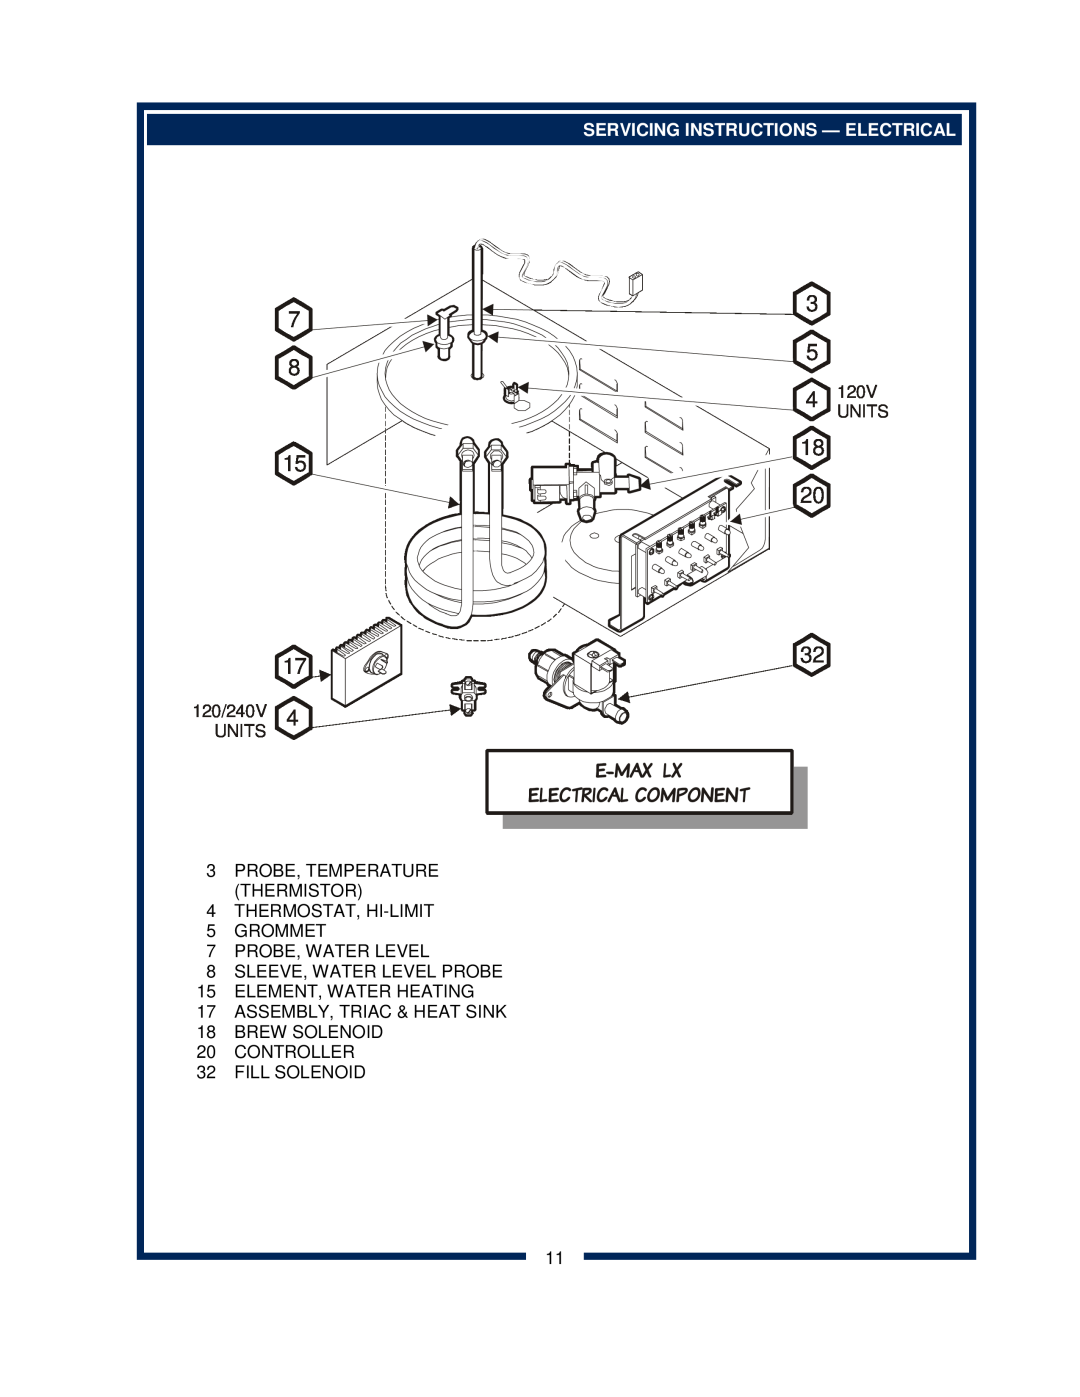 Bloomfield 2280, 2288EX, 2282 E-Maxlx Electrical Component, Servicing Instructions - Electrical, 120V, Units, 120/240V 